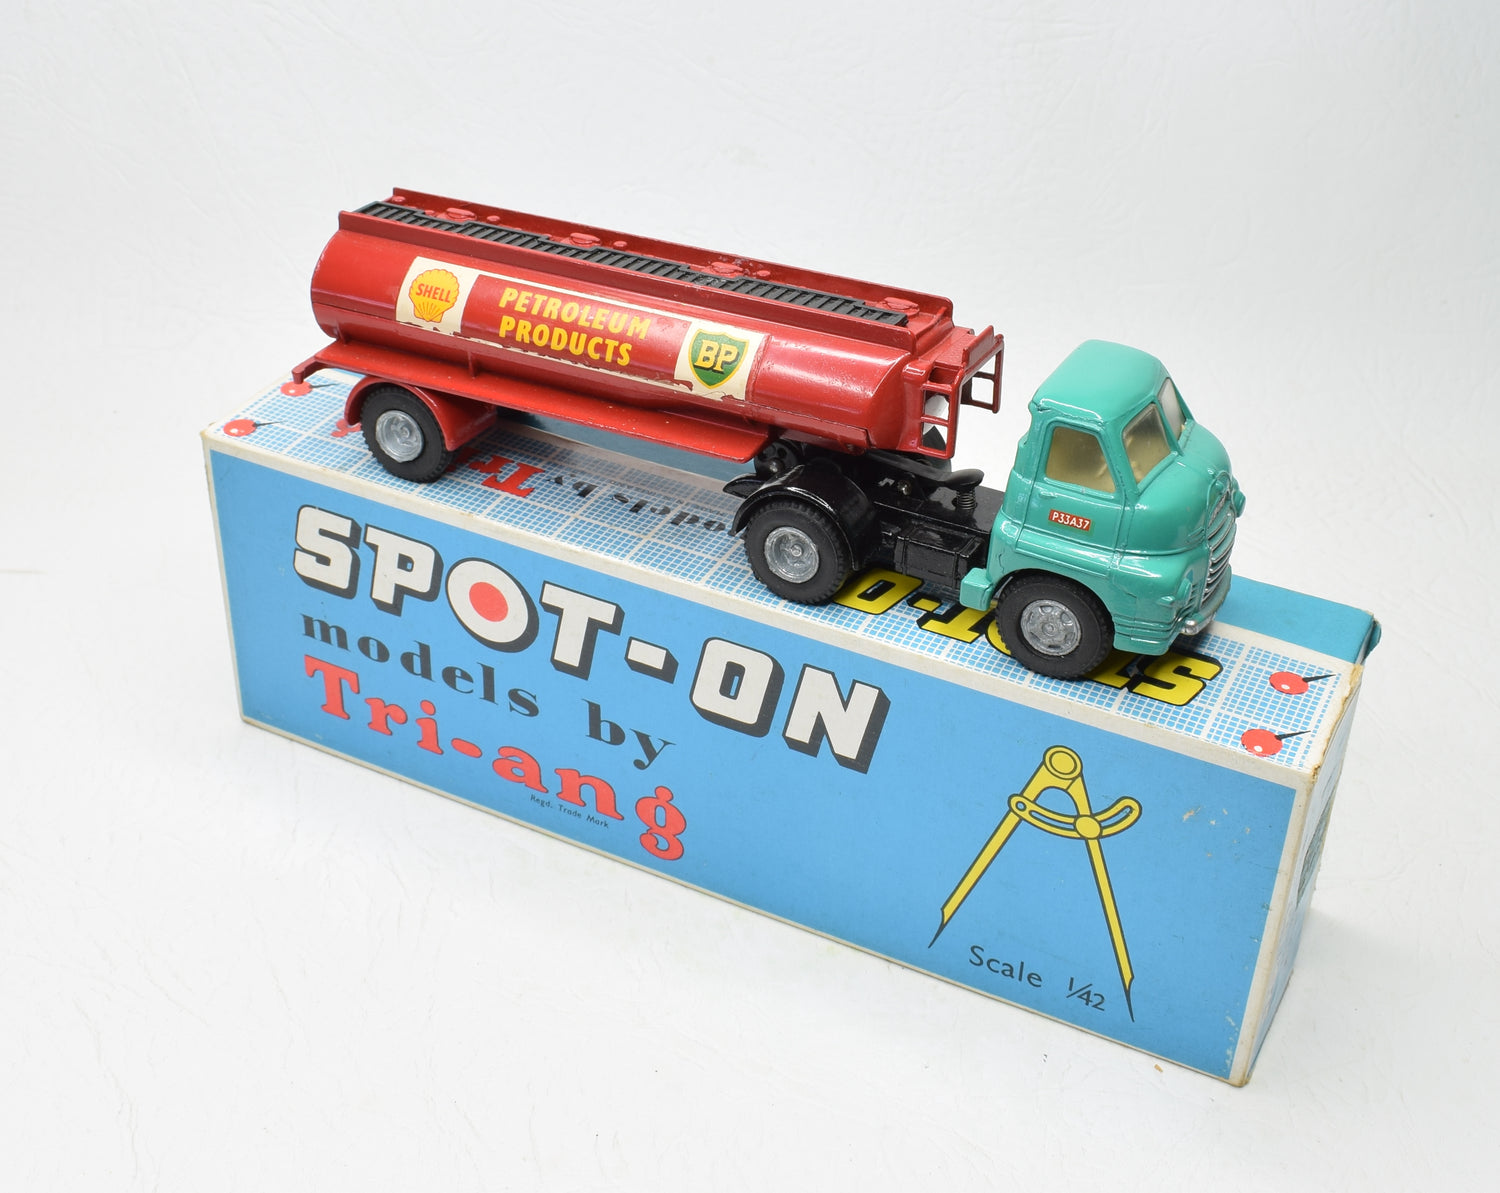 Spot-on 158A/2 Bedford 10 Tonner 2000 Gallon Tanker Very Near Mint/Boxed